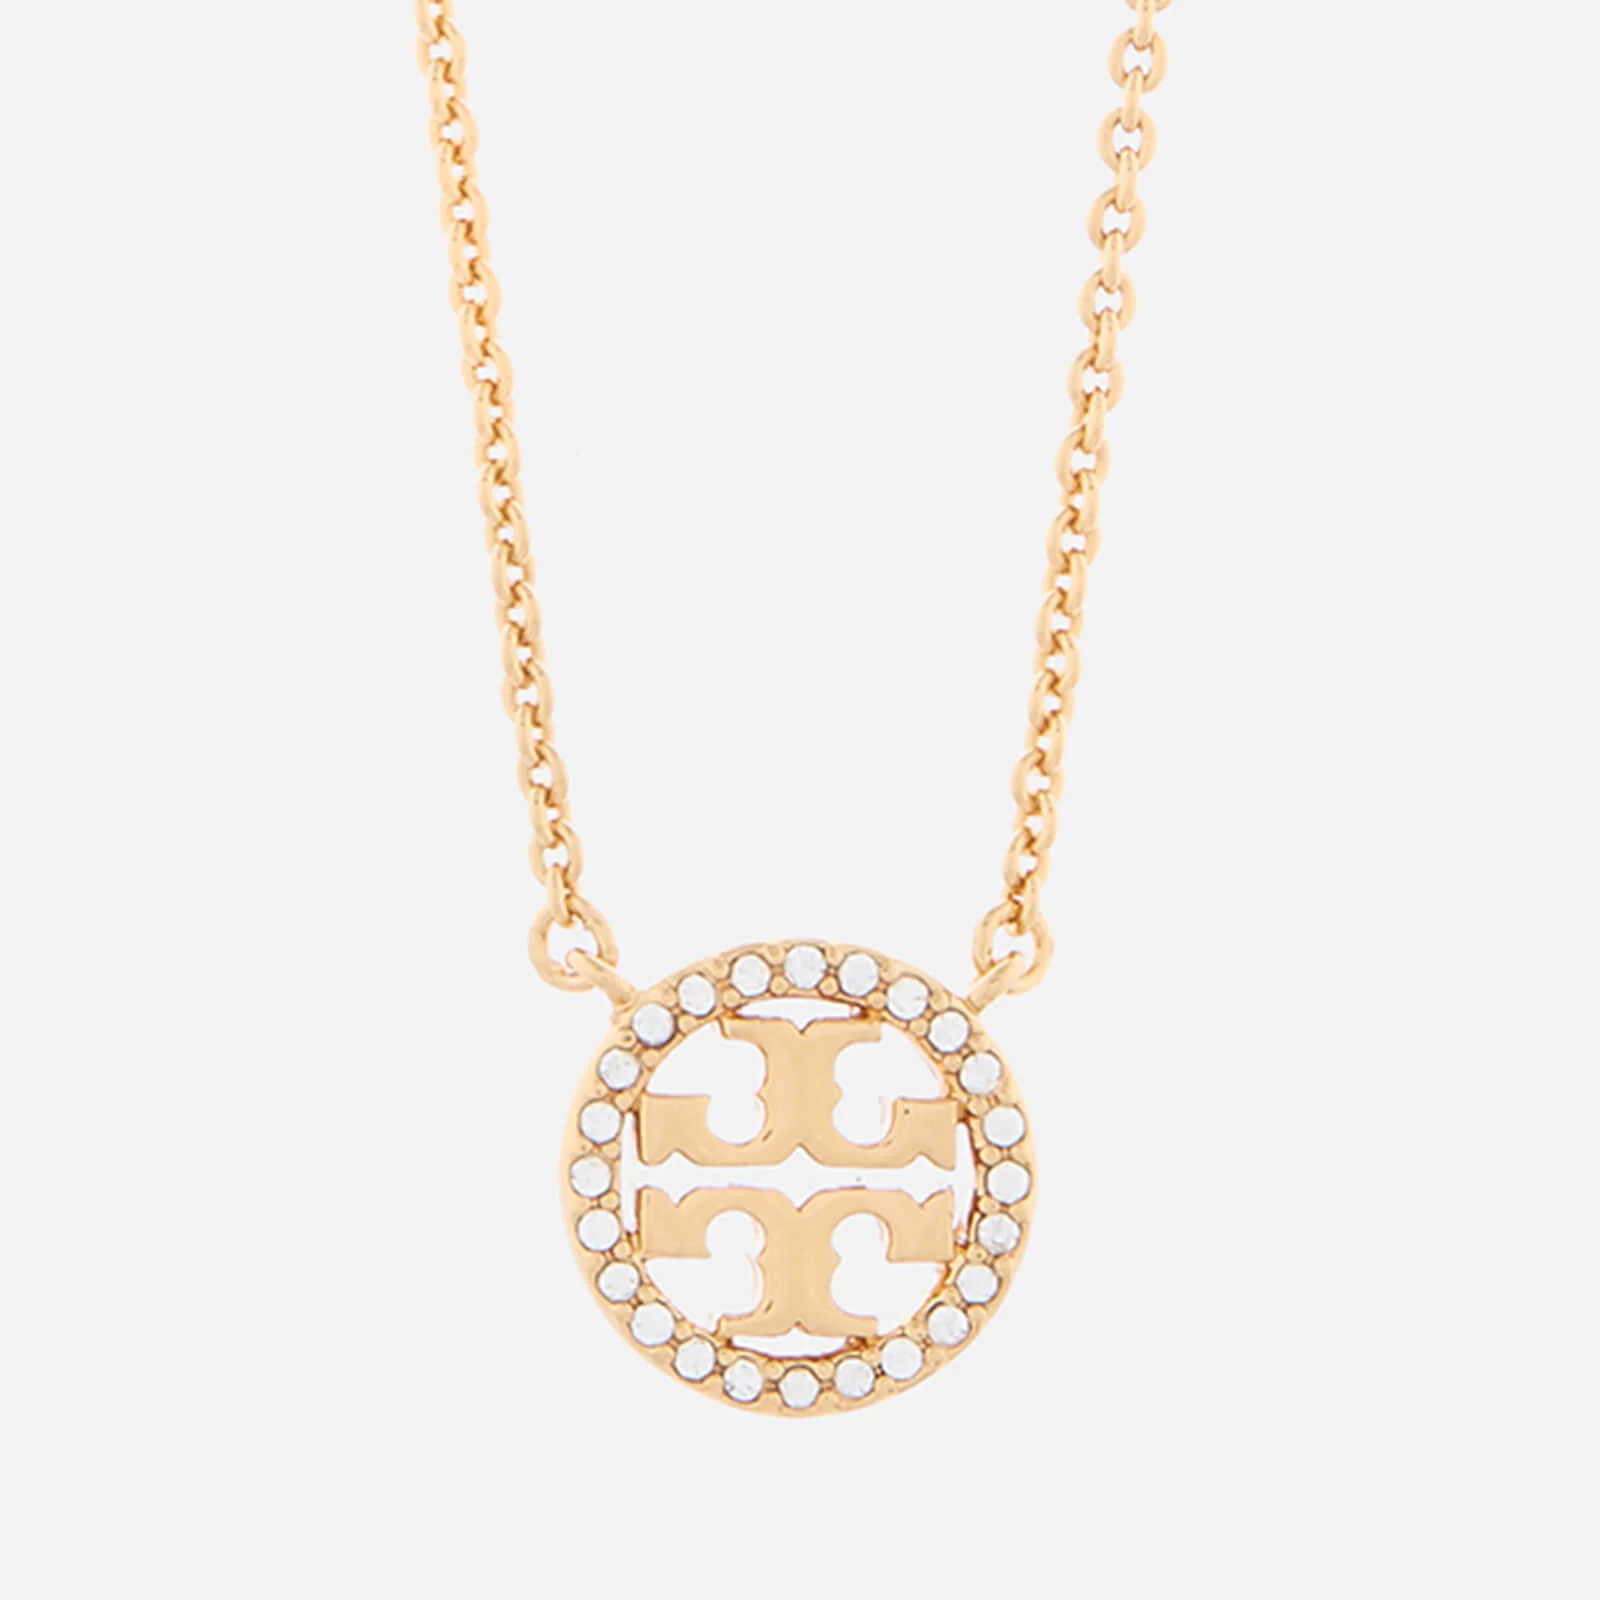 Tory Burch Women's Crystal Logo Delicate Necklace - Tory Gold Image 1